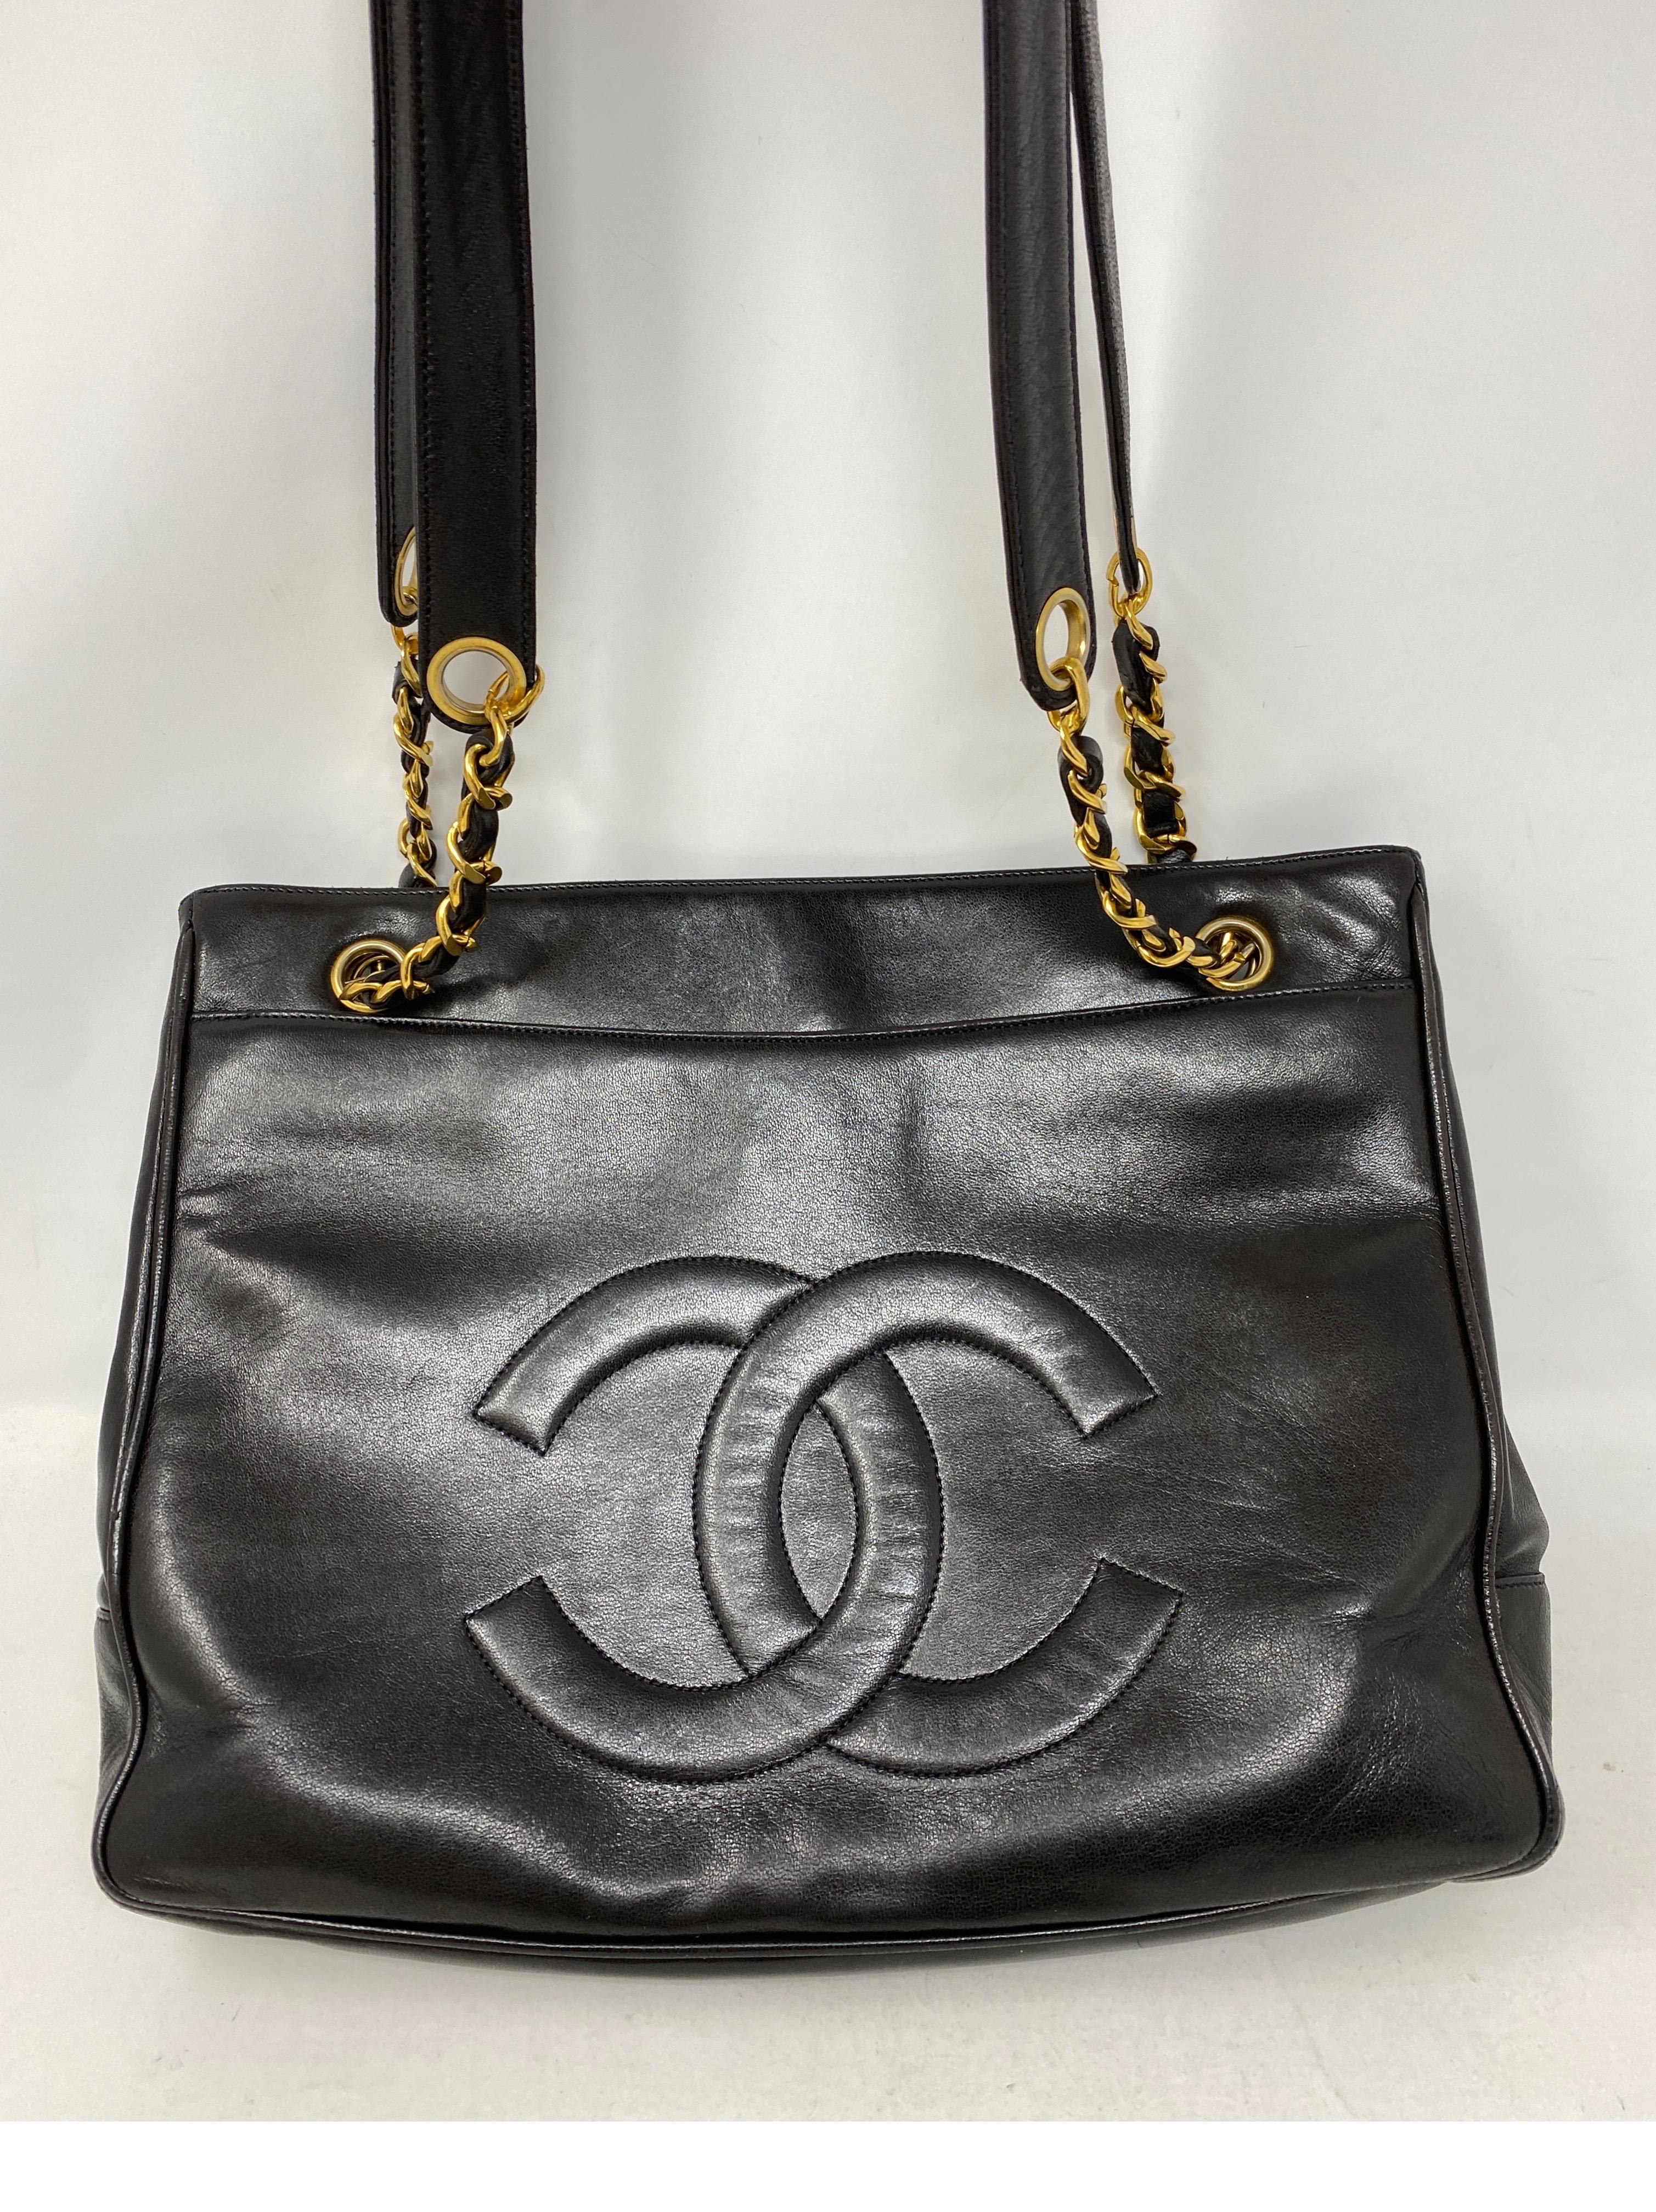 1990s Chanel Black Leather Tote Bag 5